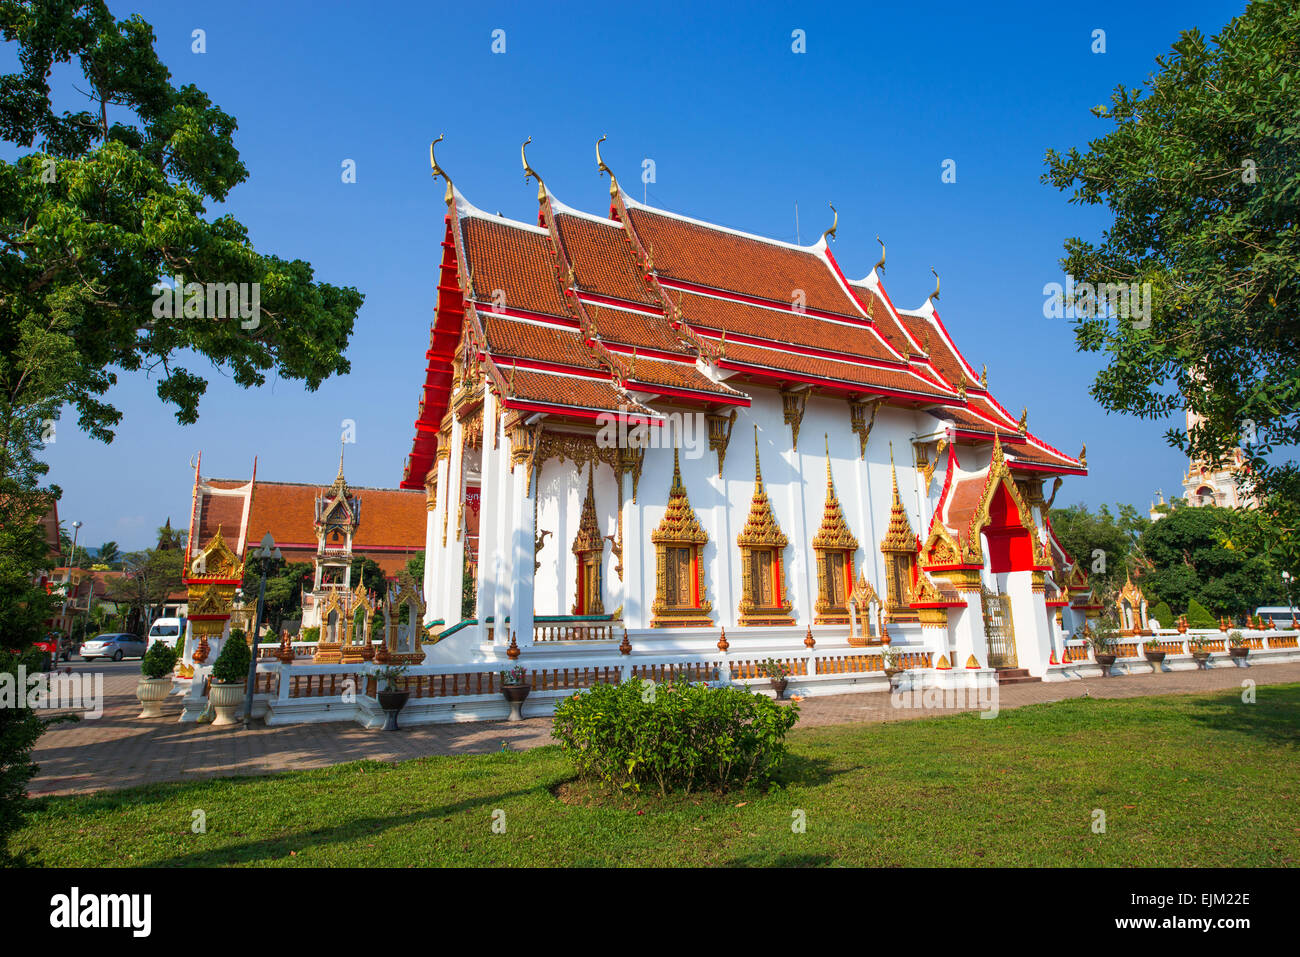 Wat Chalong in Phuket Province, Thailand Stock Photo